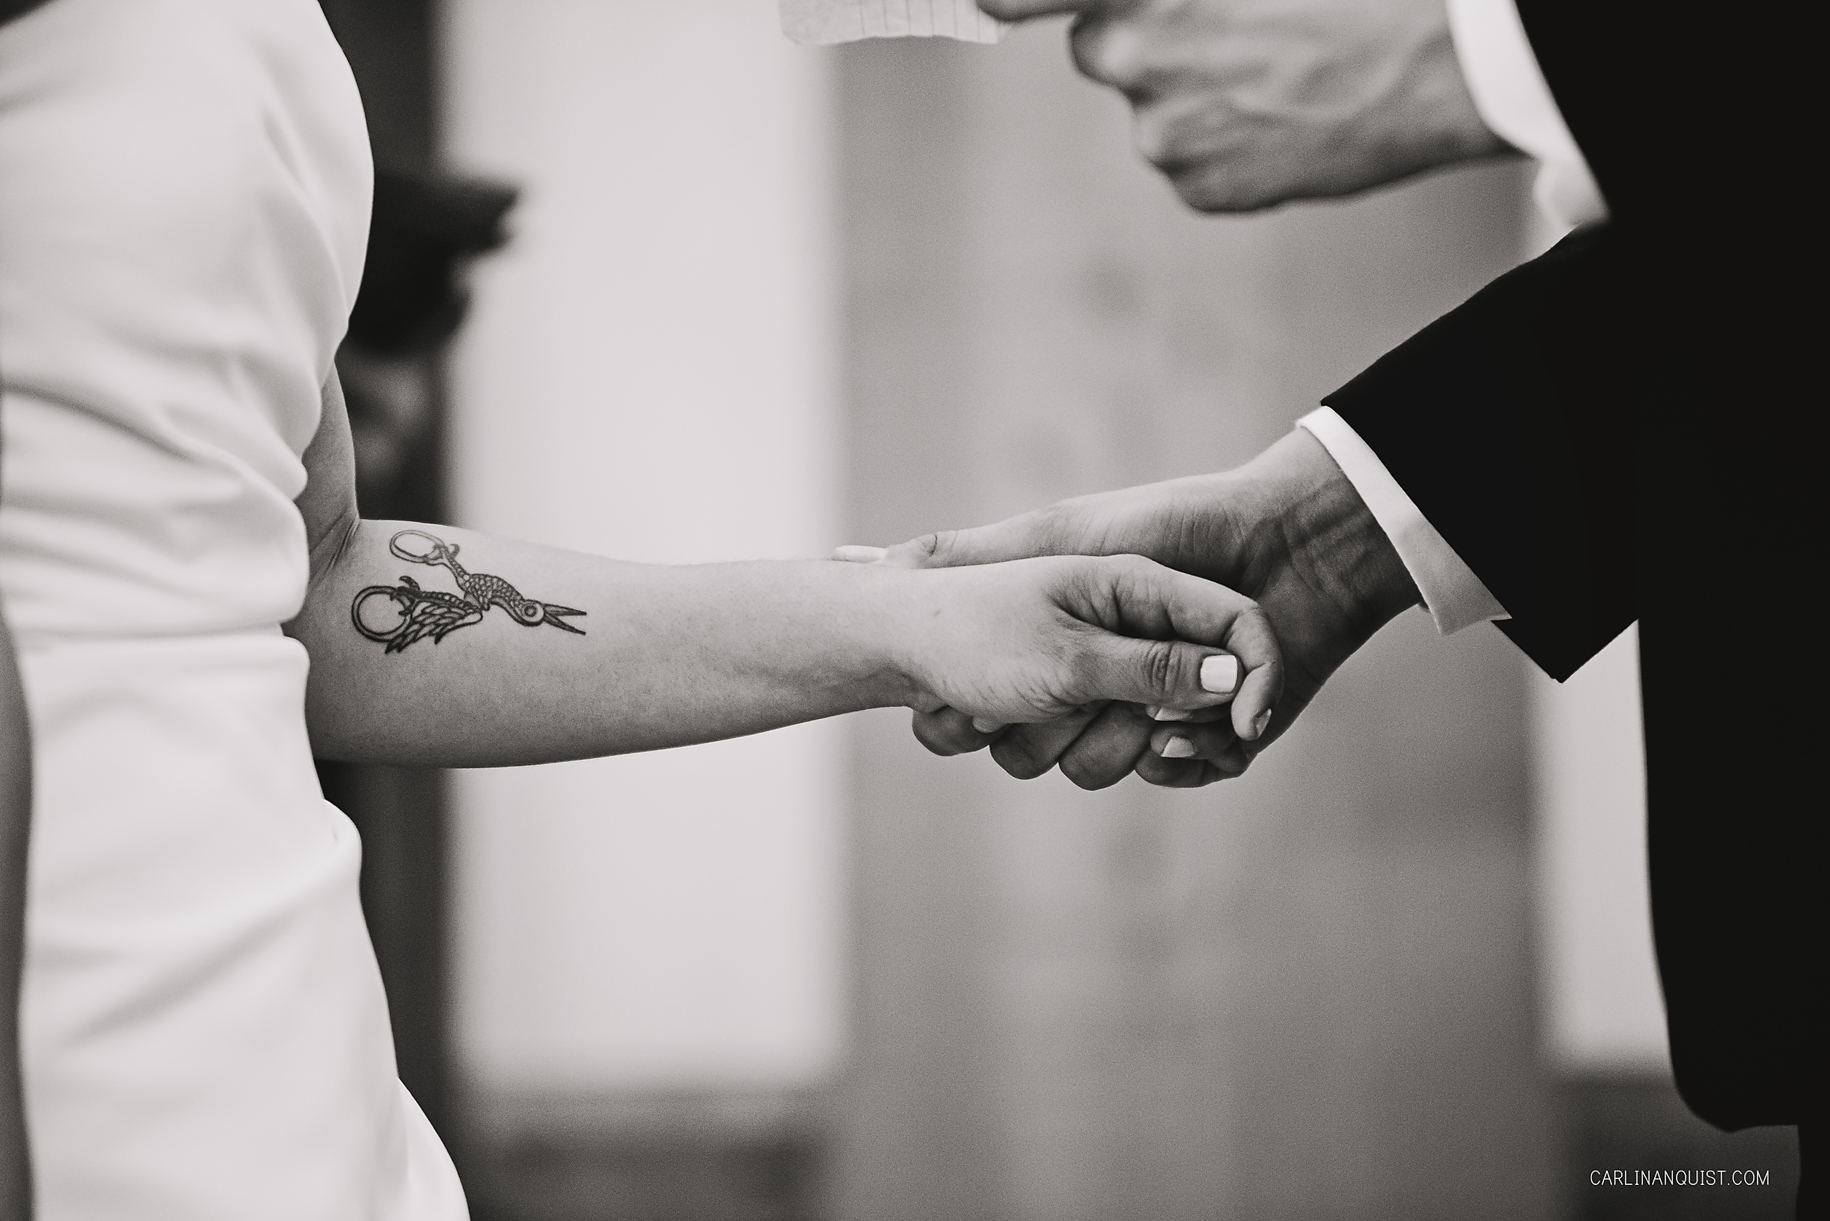 Vows | Bride with Tattoo | Crowsnest Pass Wedding Photographers | Carlin Anquist Photography